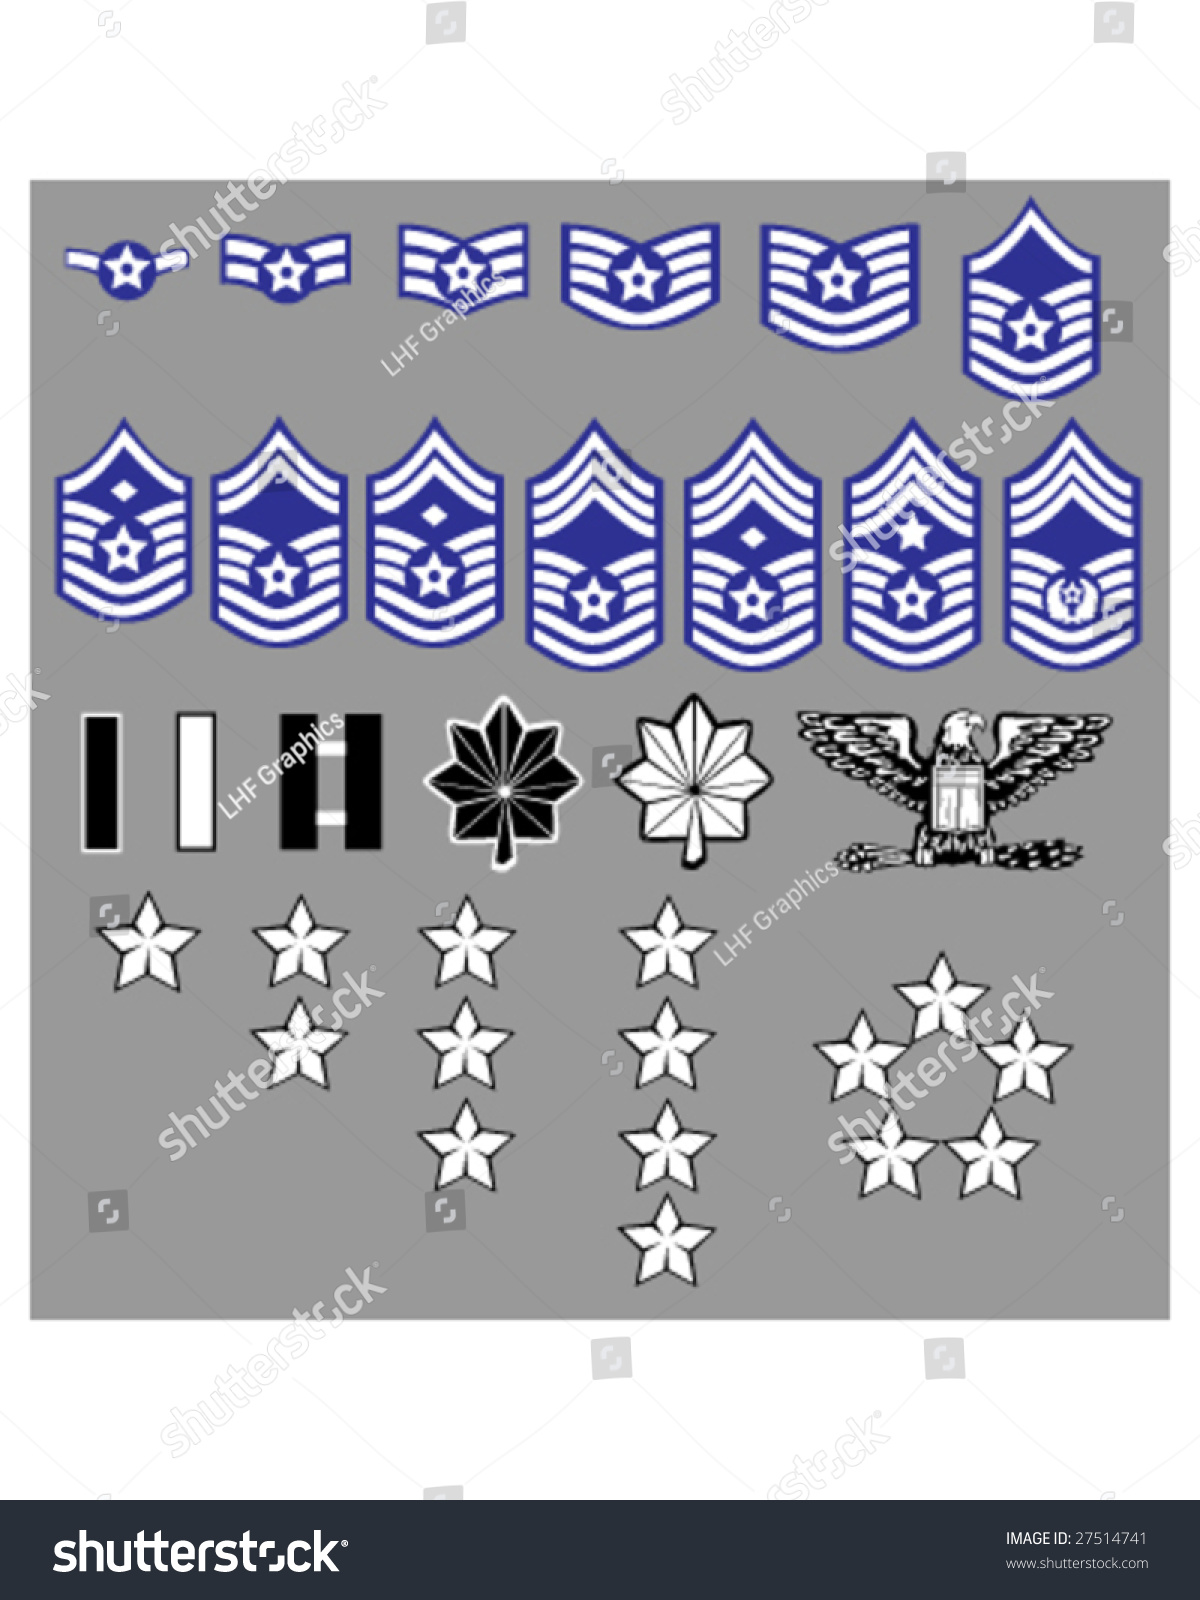 Us Air Force Rank Insignia Officers Stock Vector 27514741 - Shutterstock